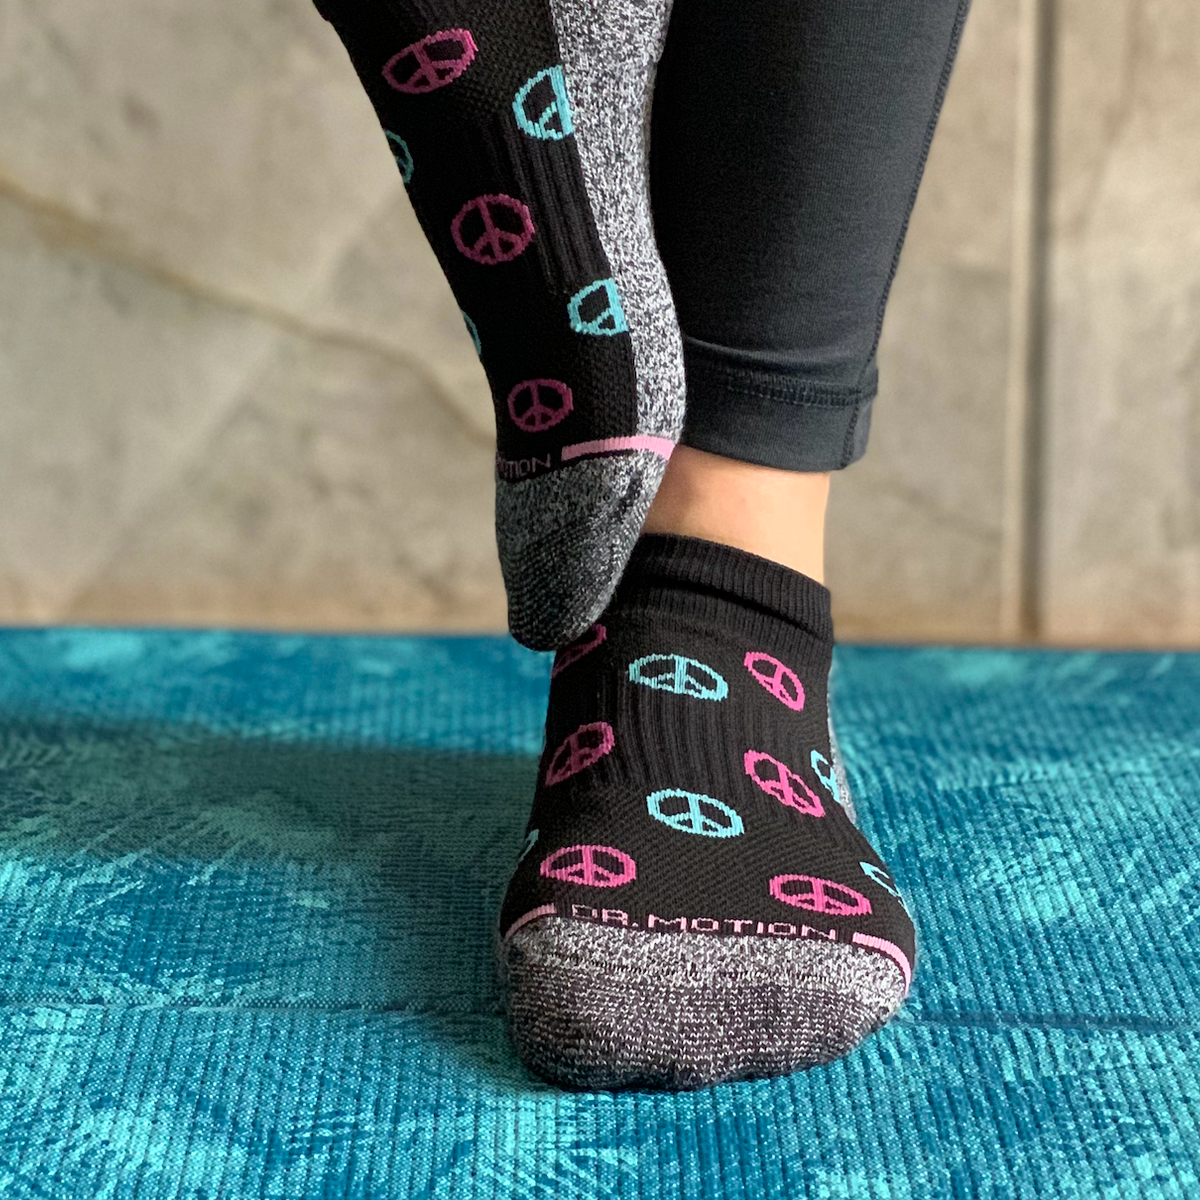 How Compression Socks Help with Yoga